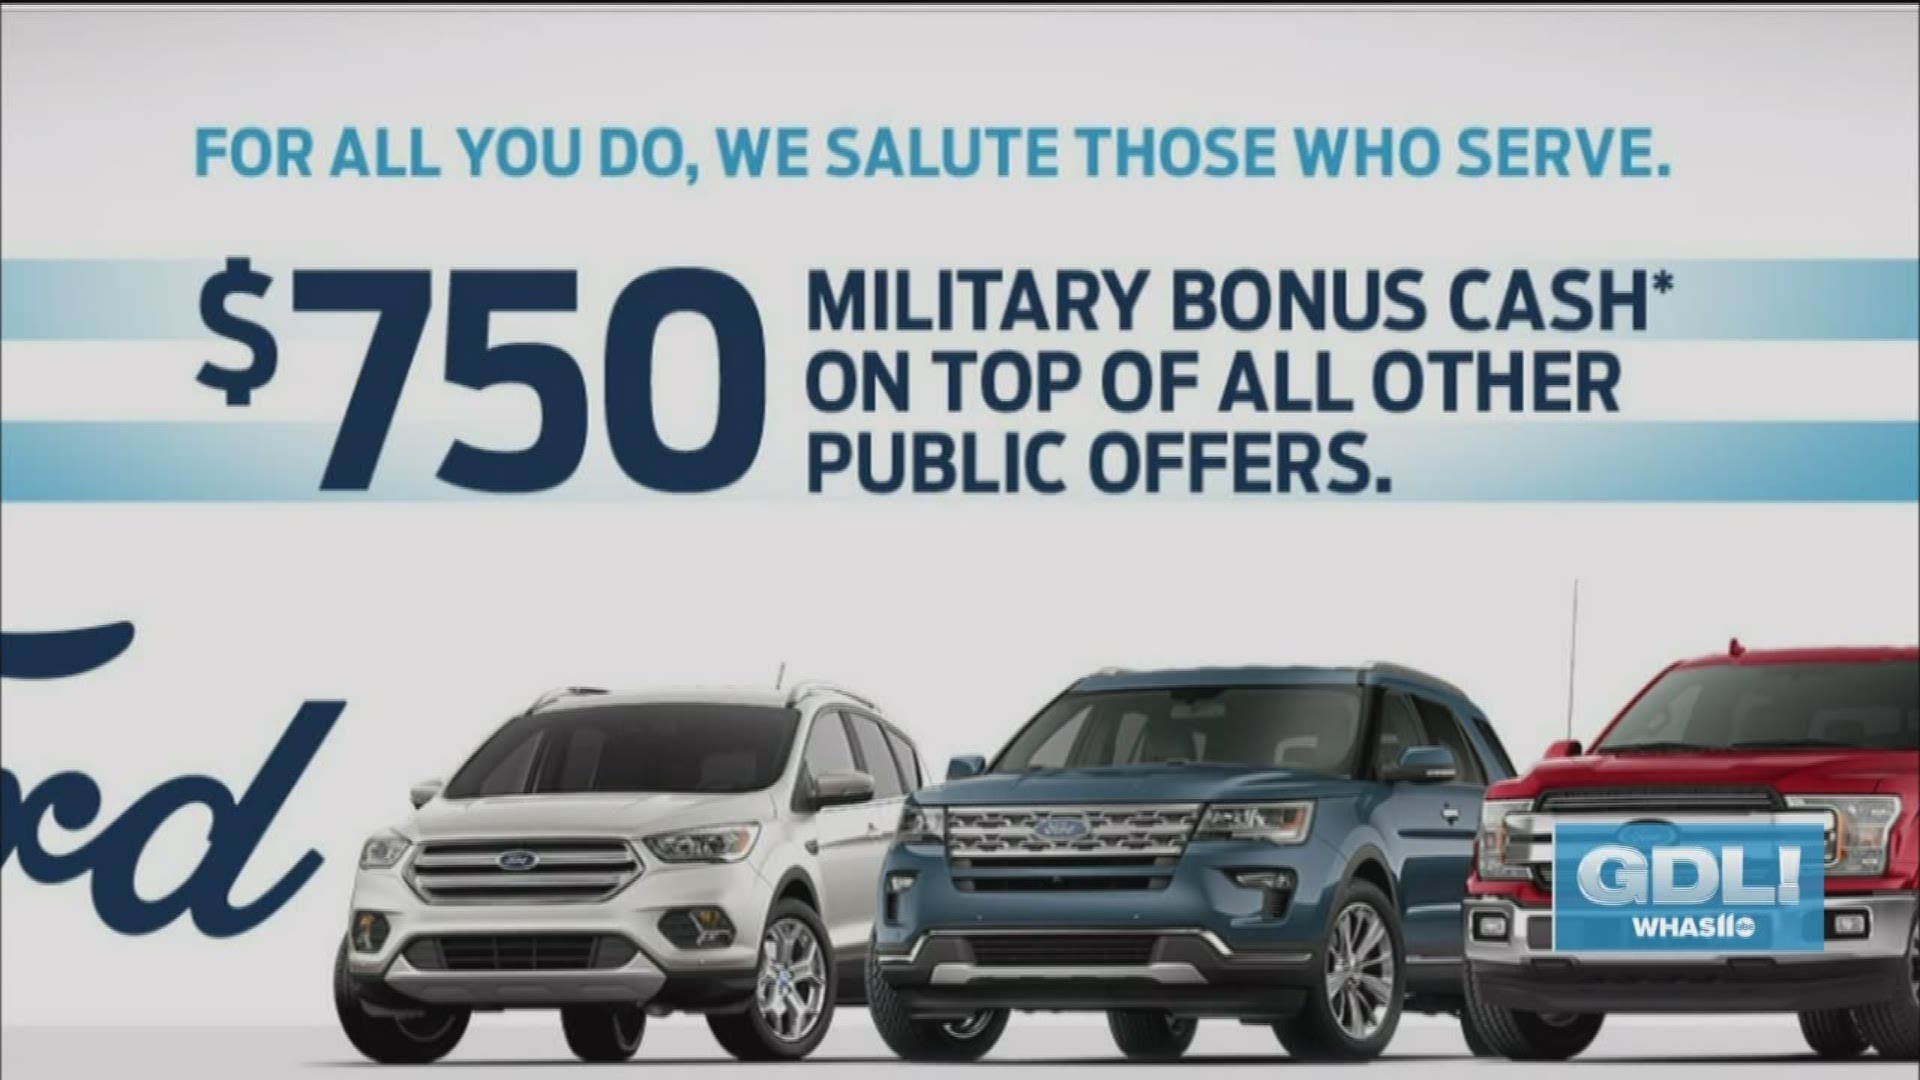 Carriage Ford has a special offer for military members, first responders and their families in honor of Memorial Day. Call 855-871-4954  or go to CarriageFord.com for more information.